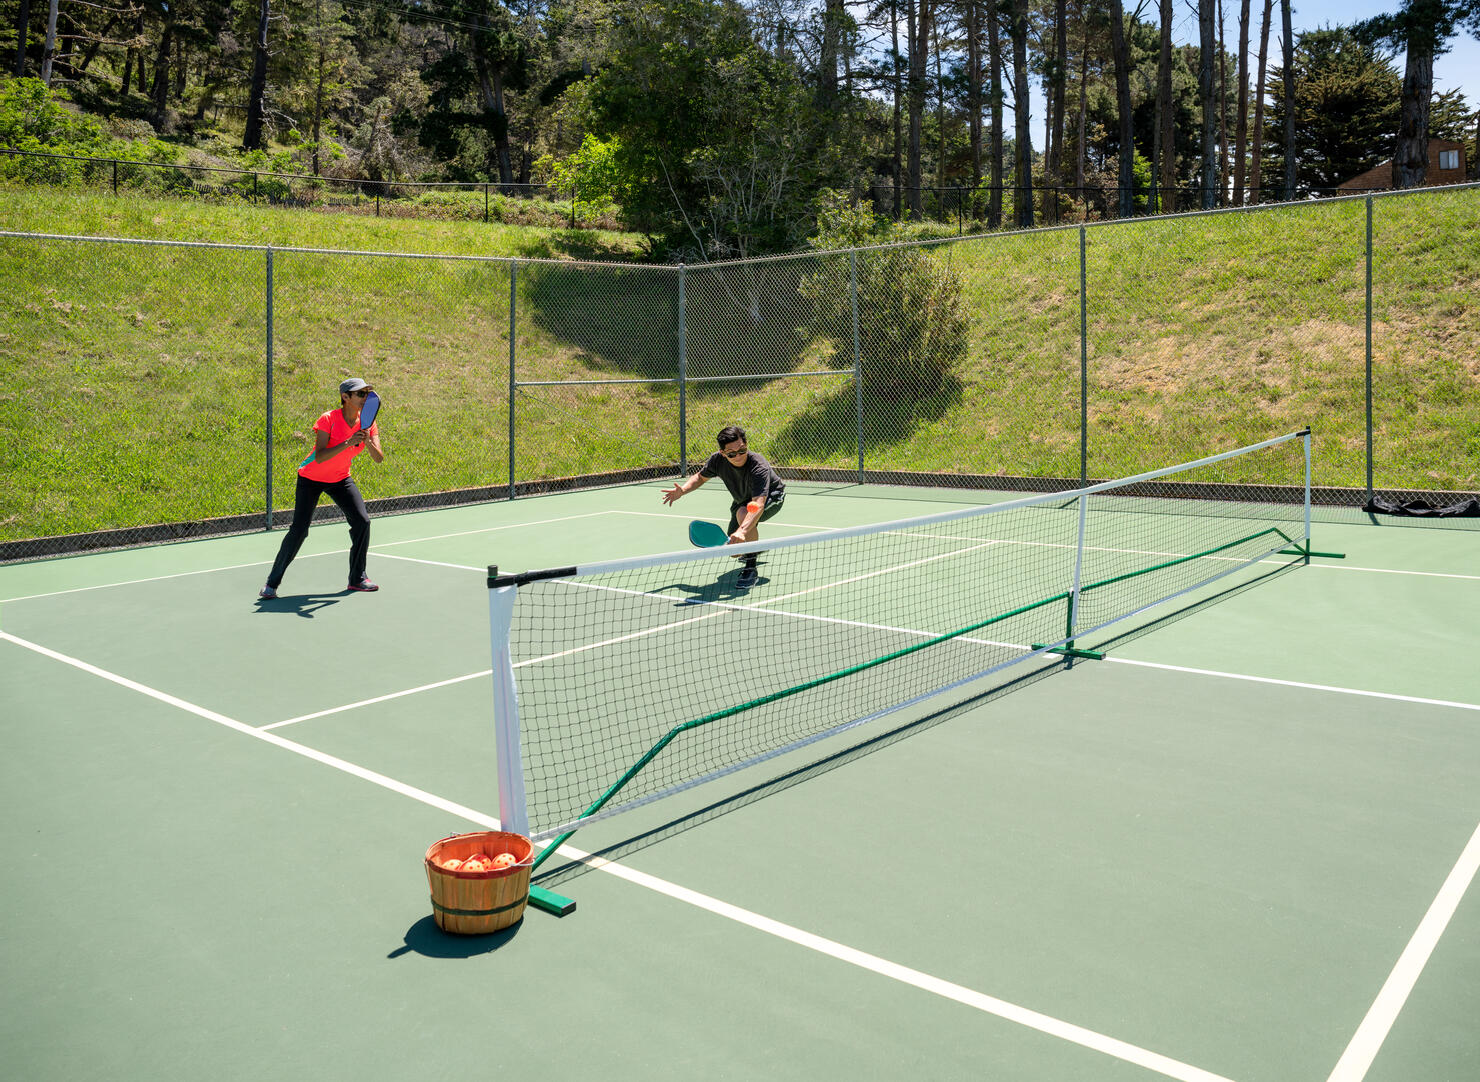 Noise From Pickleball Matches Annoying Michigan Residents iHeart